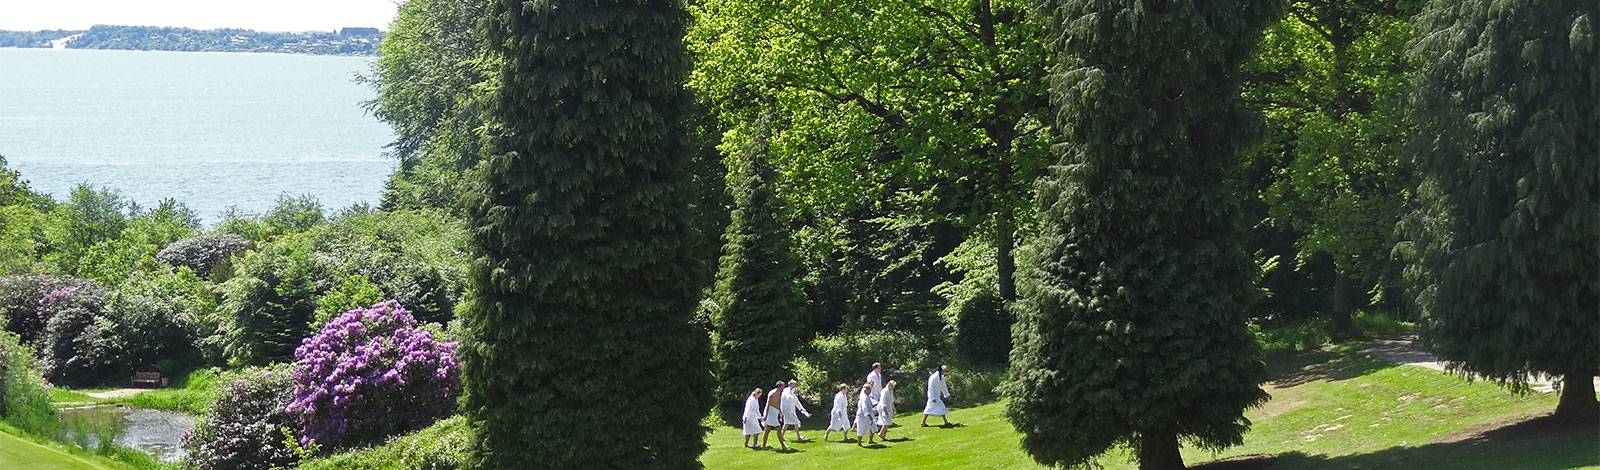 You can swim in the fjord and go for a walk through the park in a bathrobe